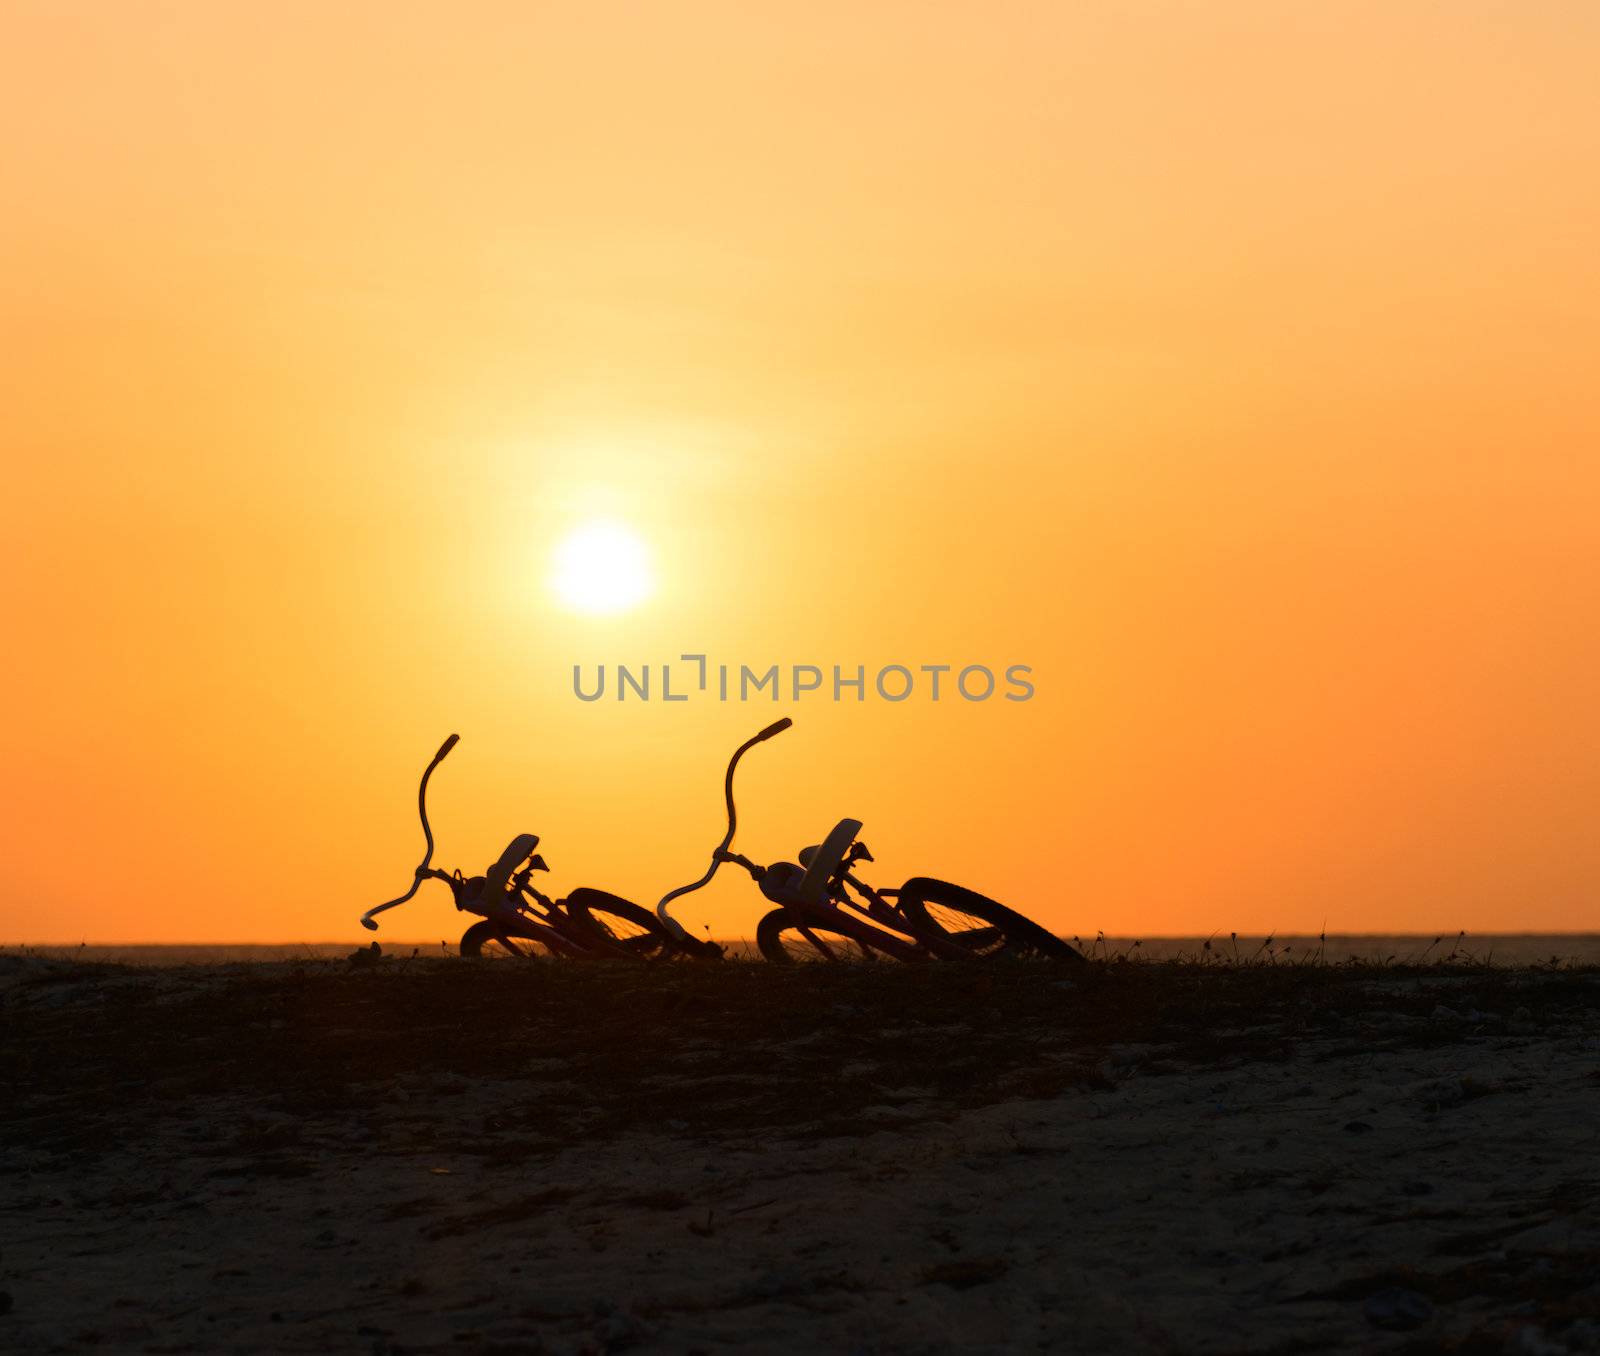 Two lying bikes silhouettes at the tropical sunset on a beach with bird in clear sky